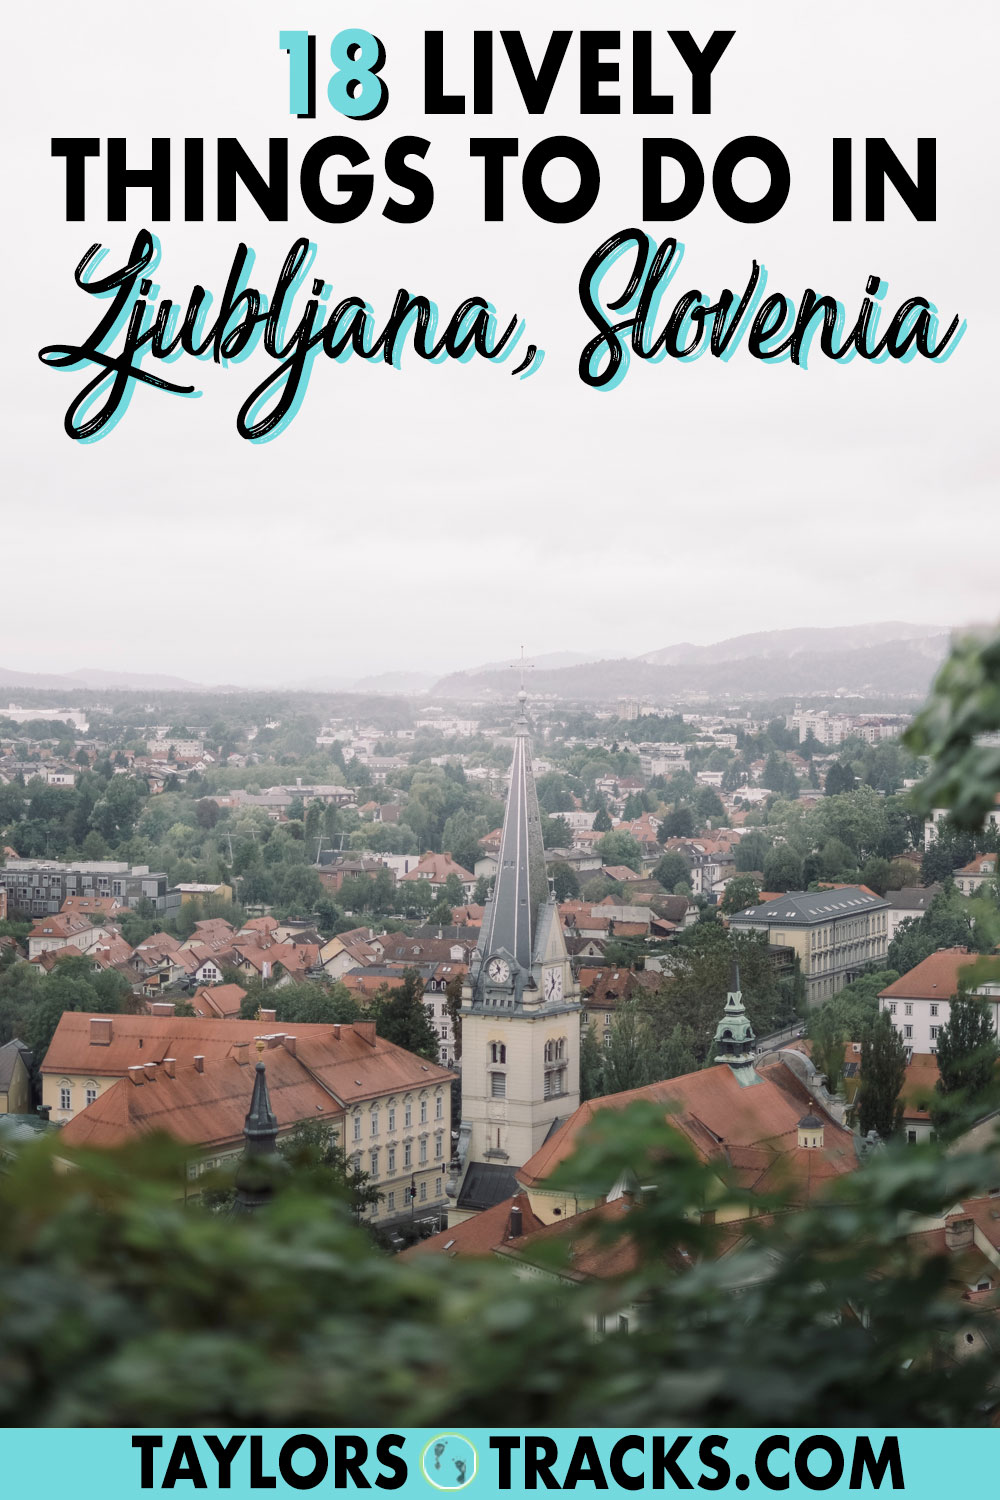 Find what to do in Ljubljana to add to your Slovenia itinerary with this detailed Ljubljana travel guide. Discover things to do in Ljubljana for foodies, backpackers, history lovers, adventurous souls and more. Click to start planning the Ljubljana part of your Slovenia trip!